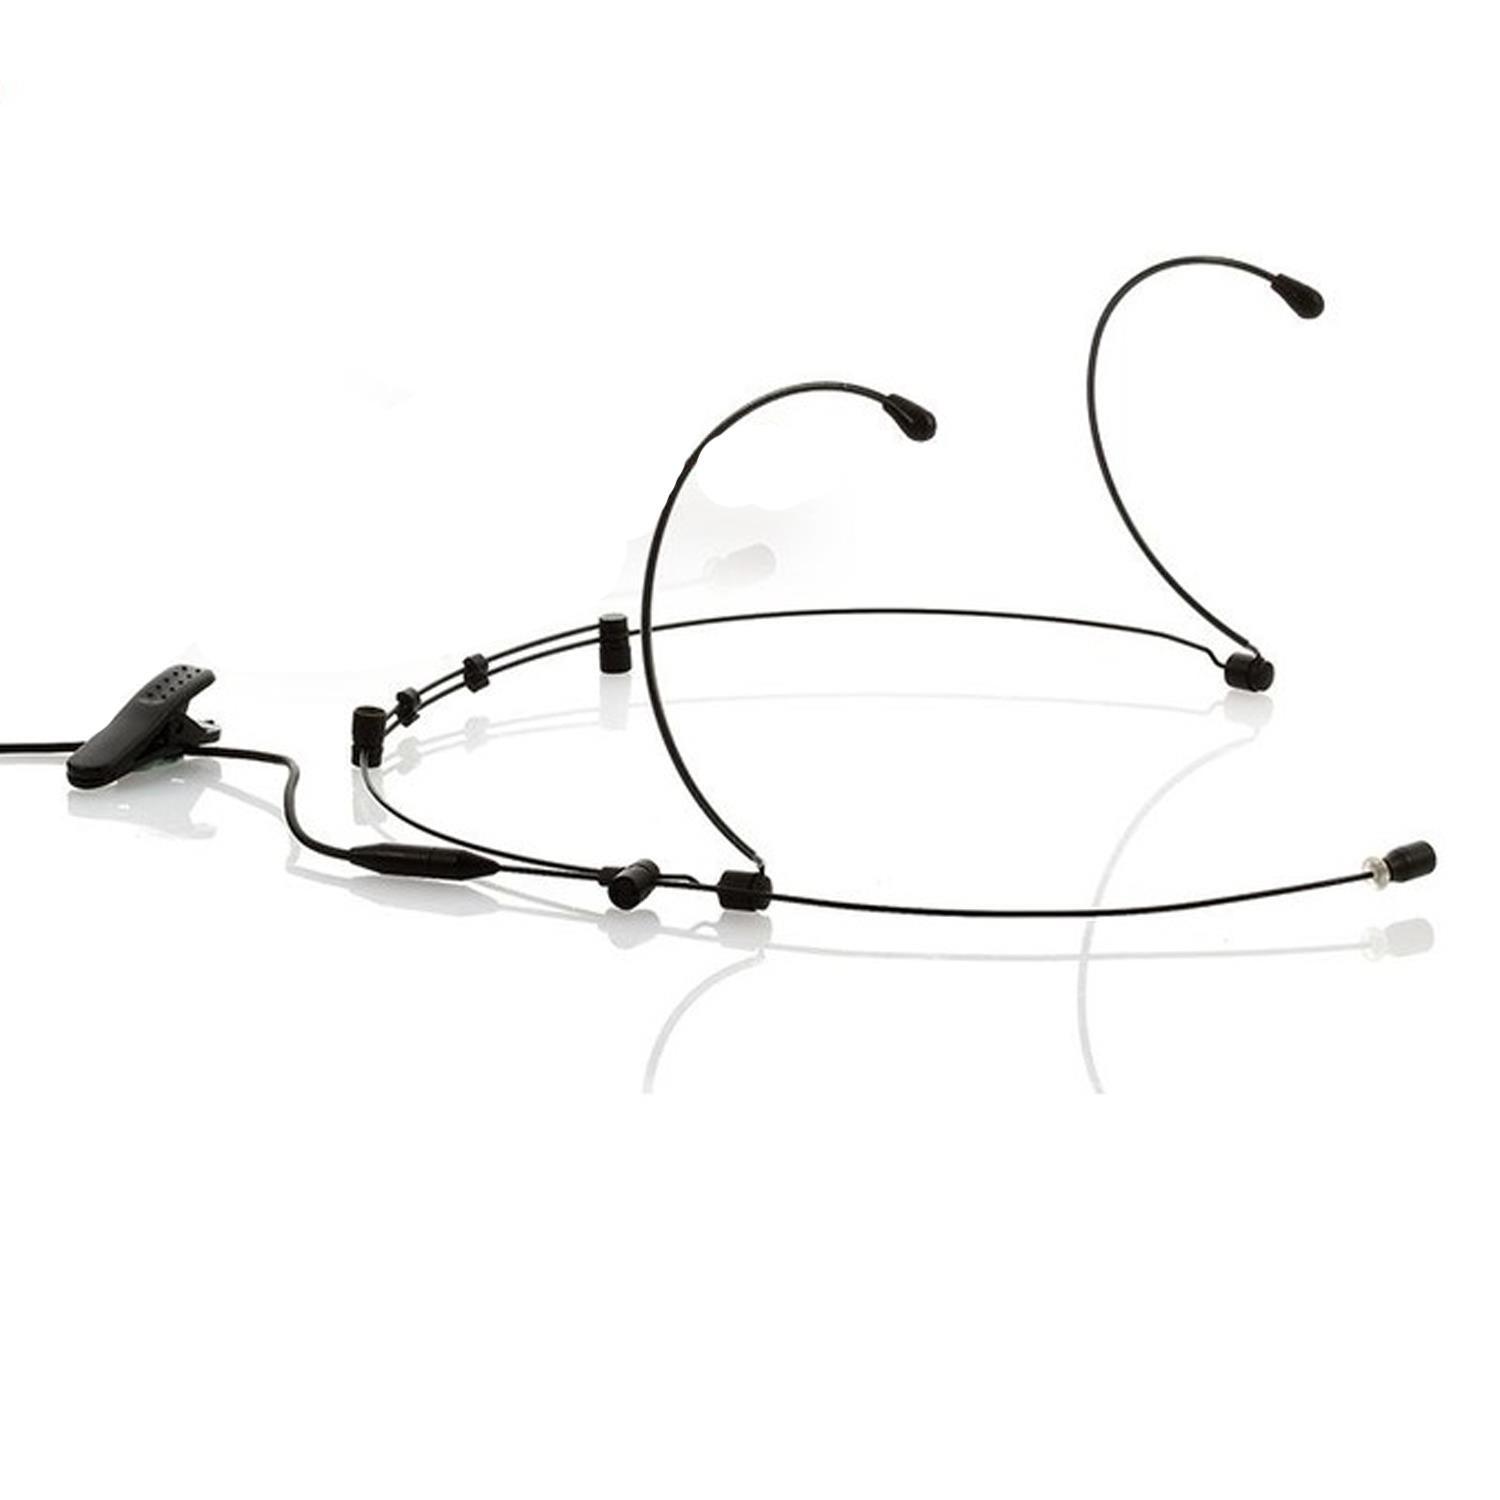 JTS CM-804i Black Double Ear-hook Omni-directional Microphone - DY Pro Audio